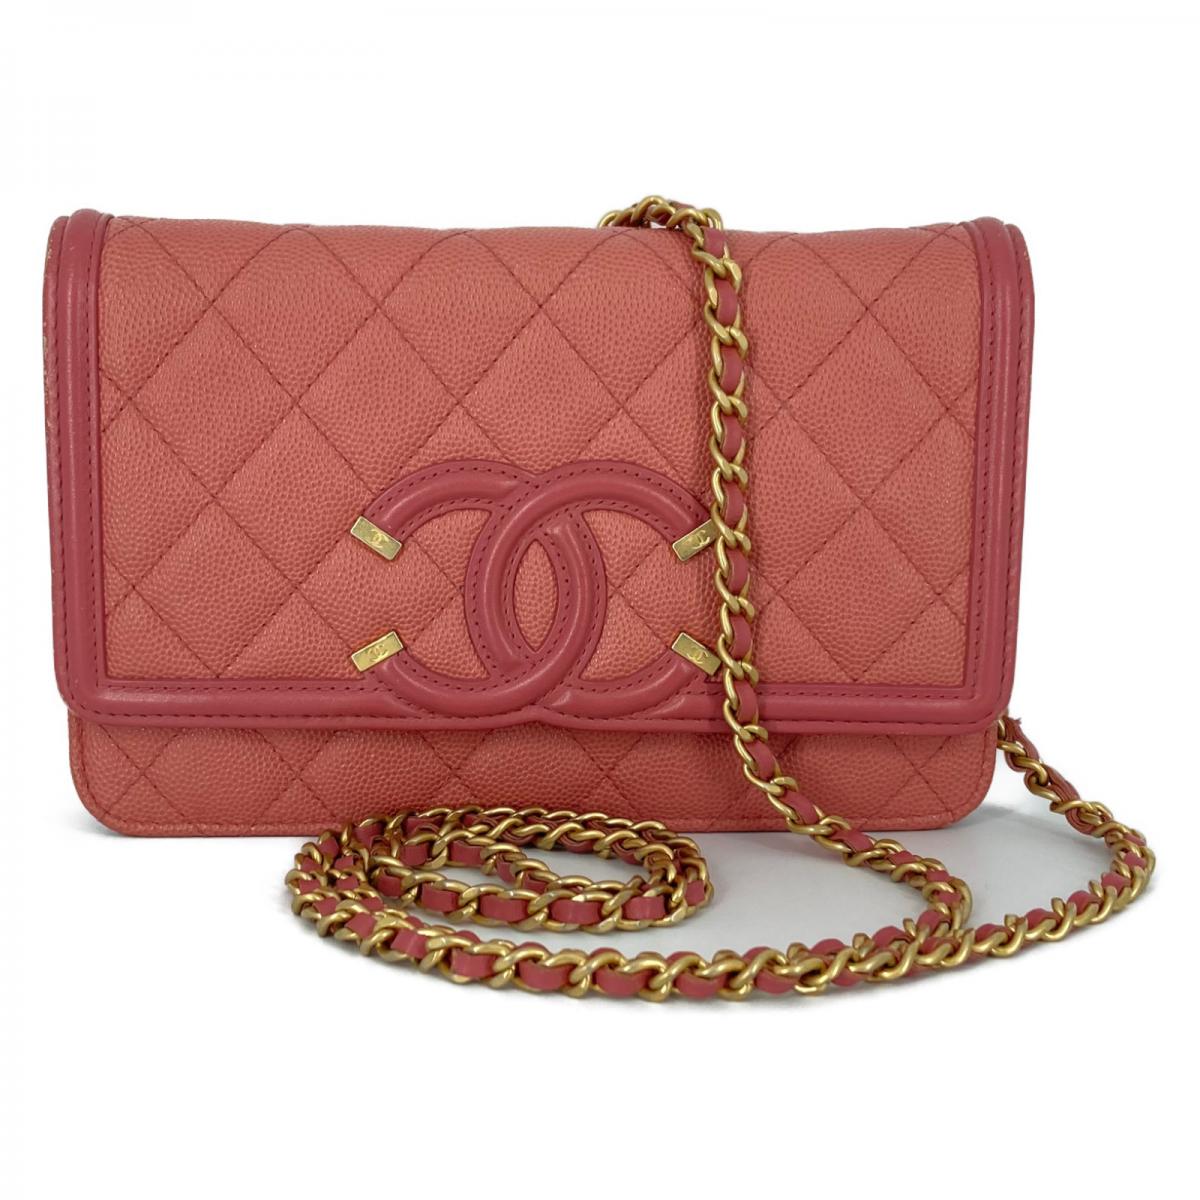 Chanel Filigree Wallet On Chain Leather Crossbody Bag in Excellent condition